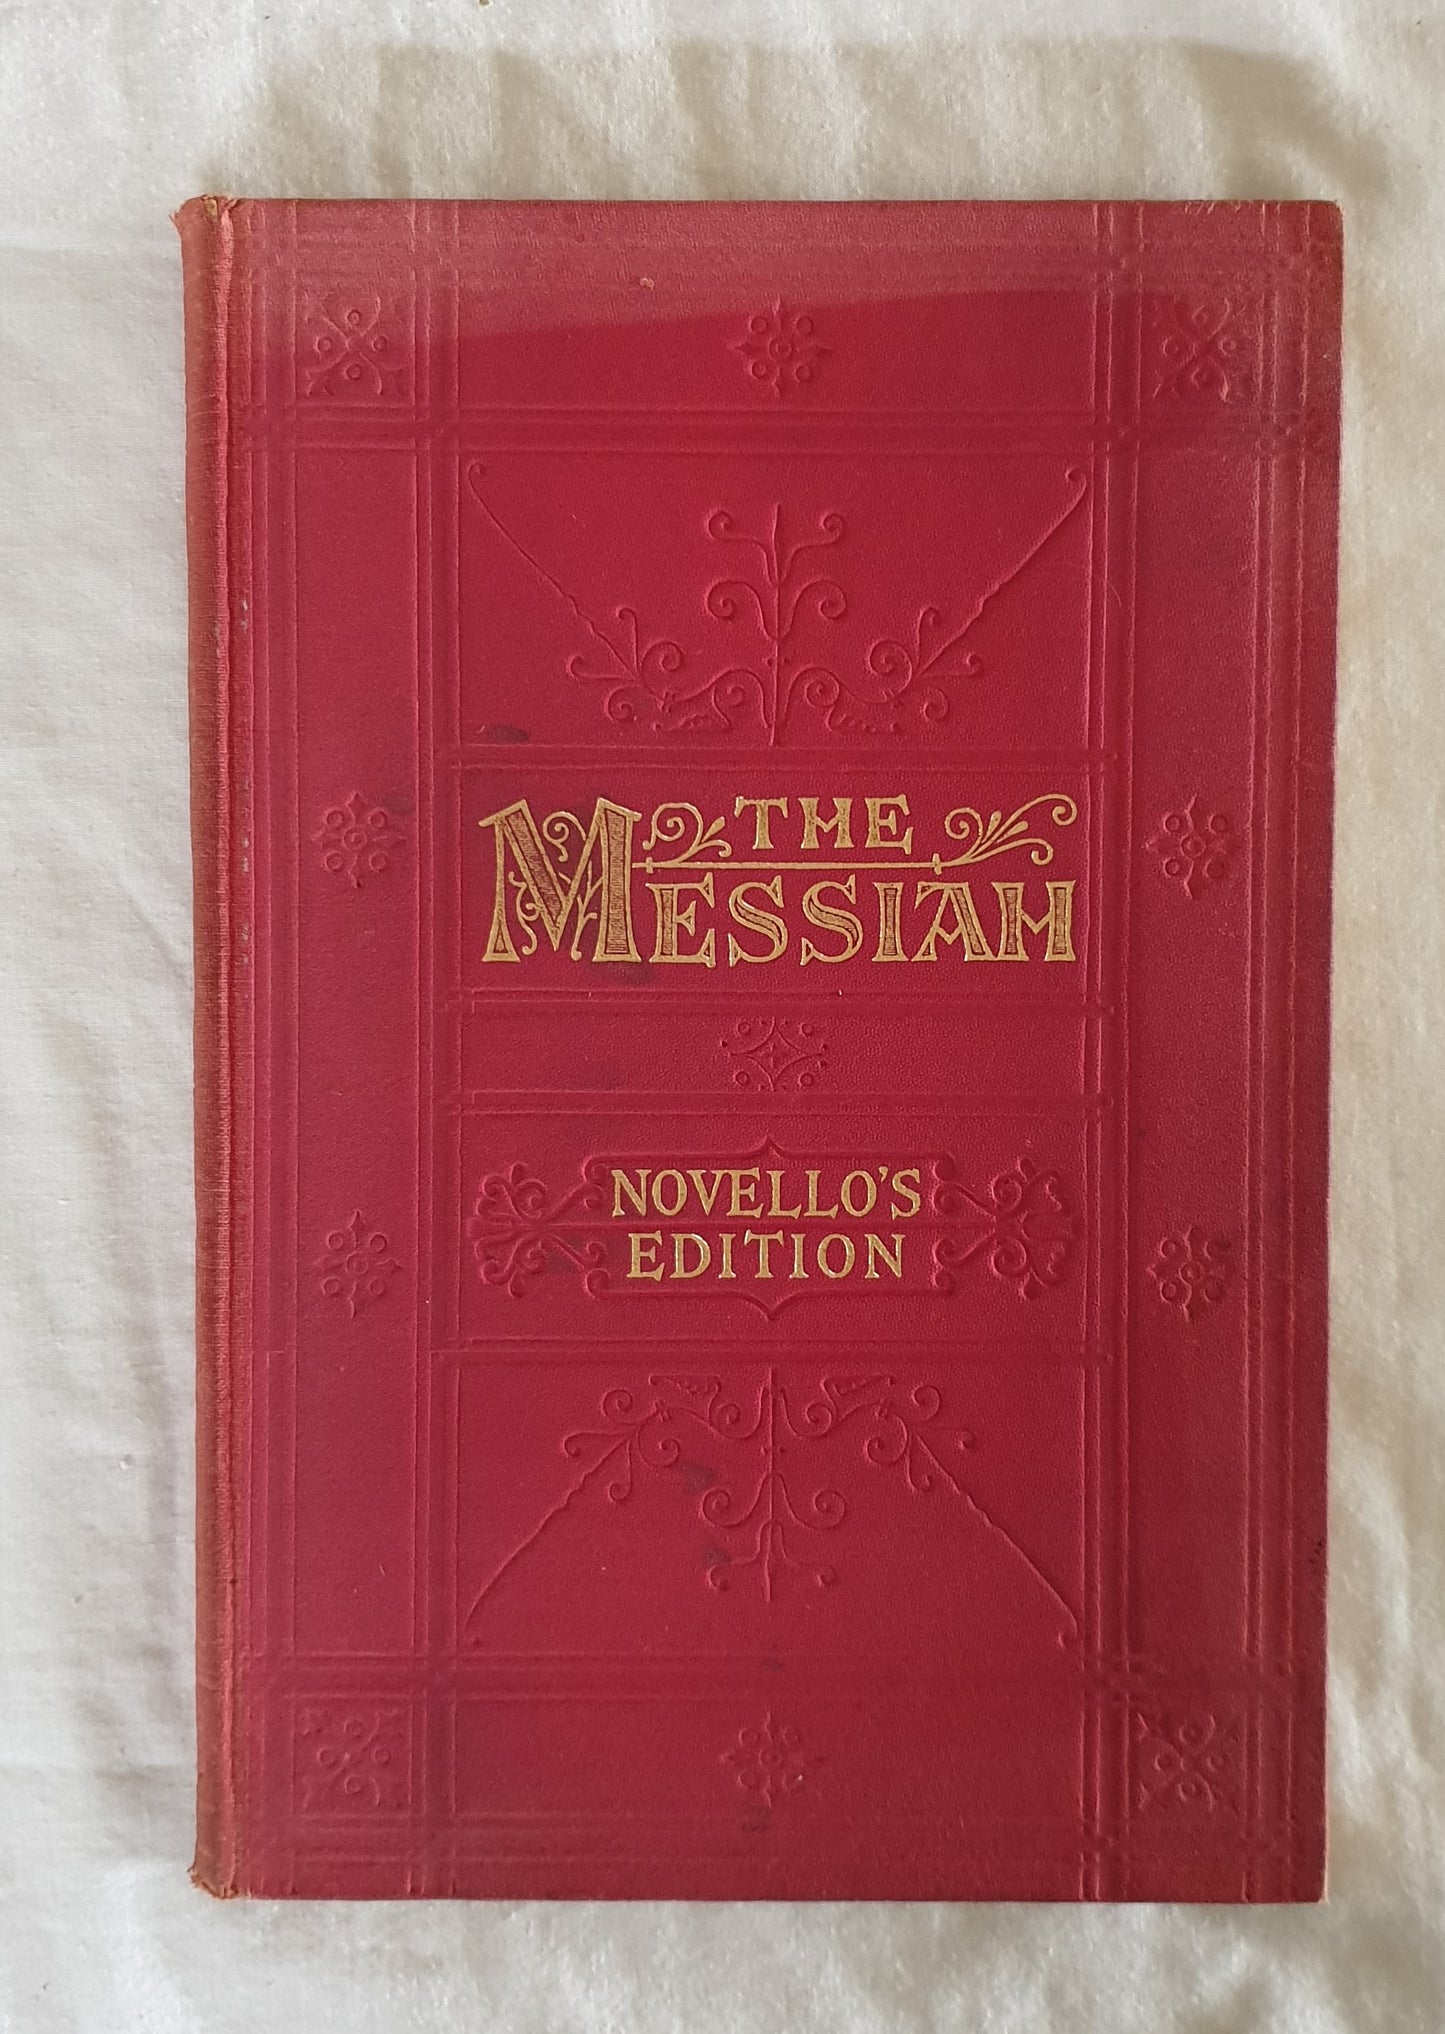 The Messiah  A Sacred Oratorio  Compased in the Year 1741 by G. F. Handel